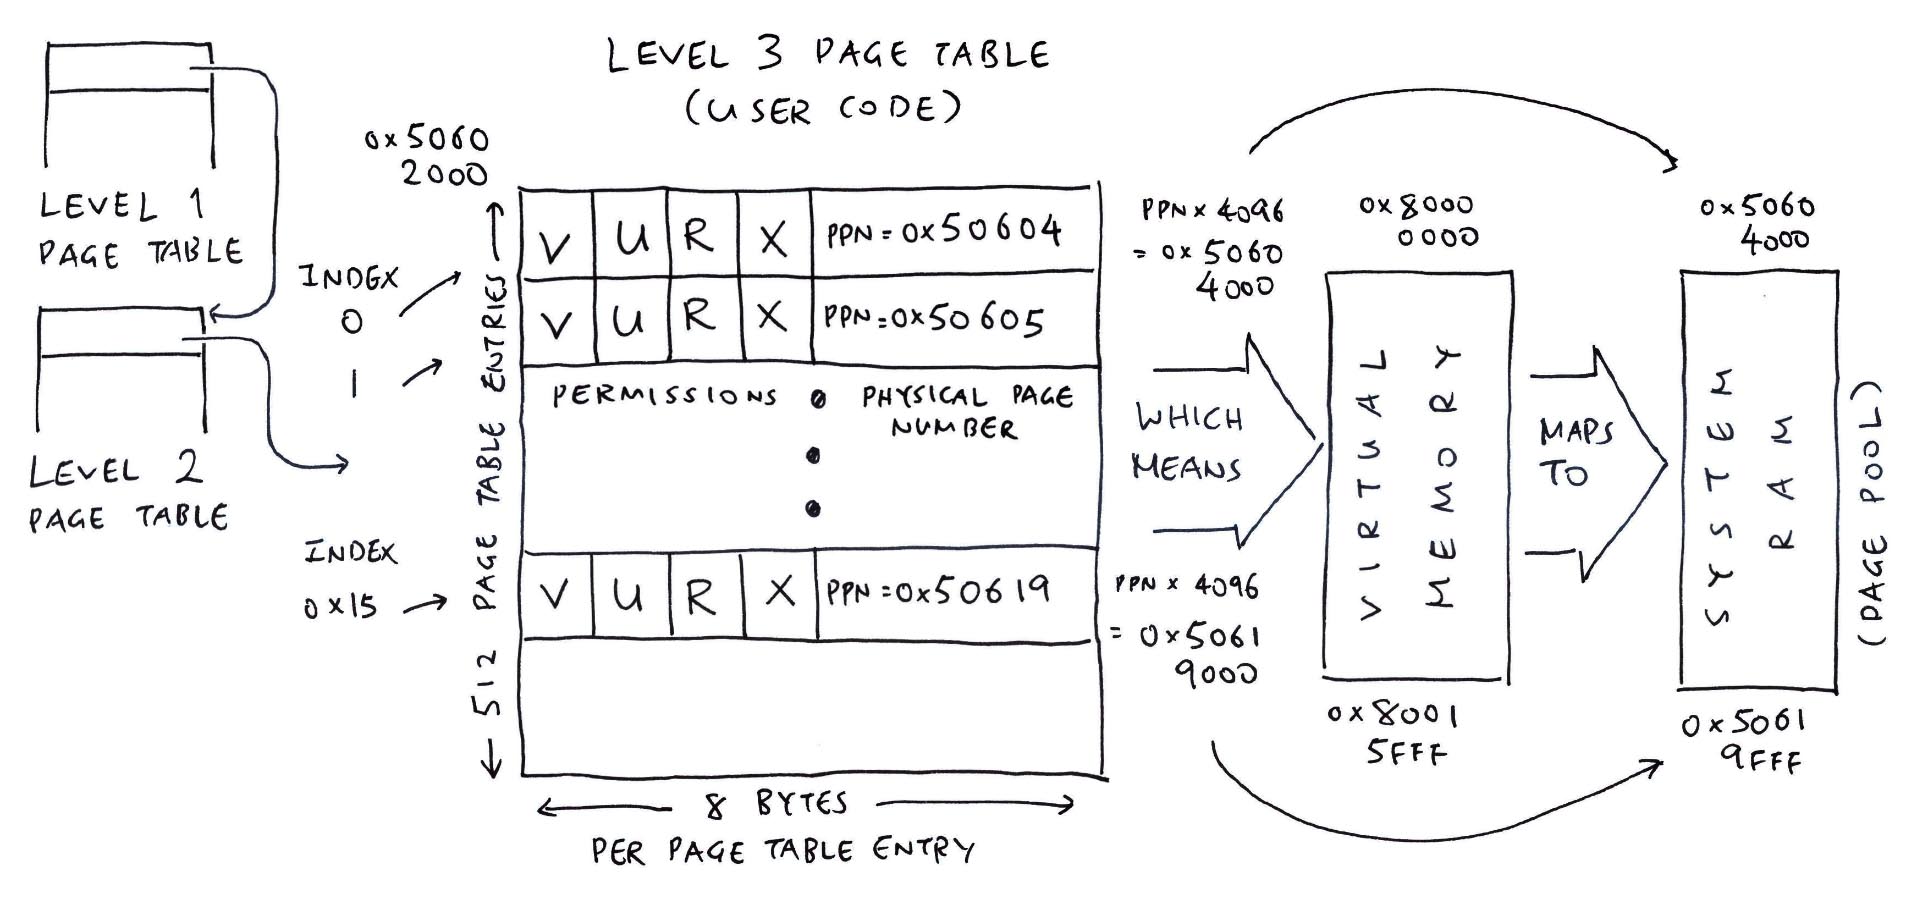 Level 3 Page Table for User